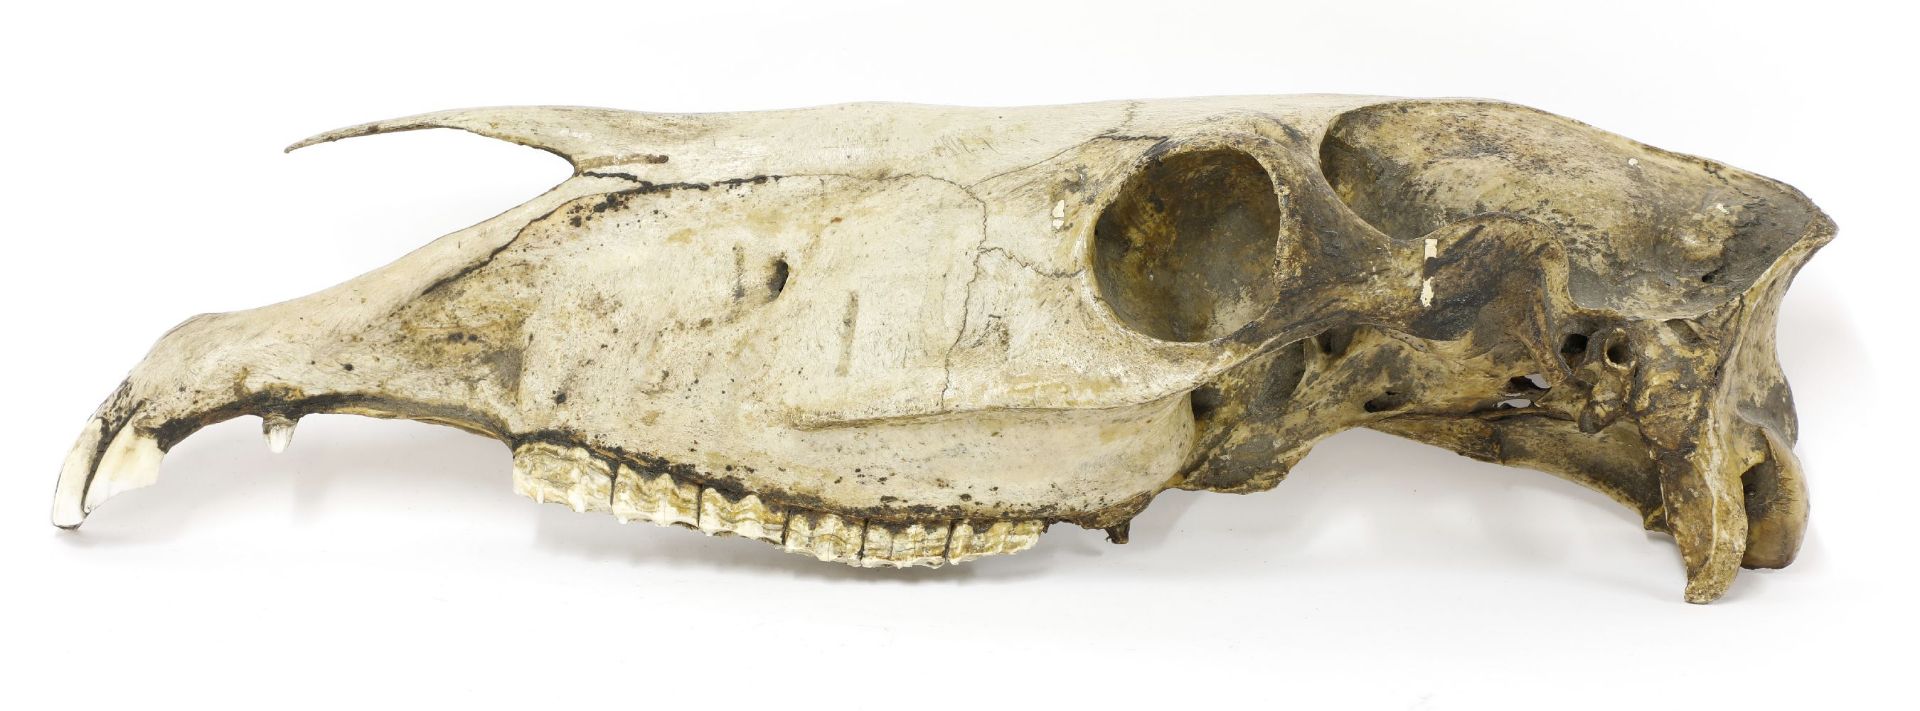 HORSE SKULL,19th century, a nicely-aged teaching aid bisected skull of a horse,58cm long